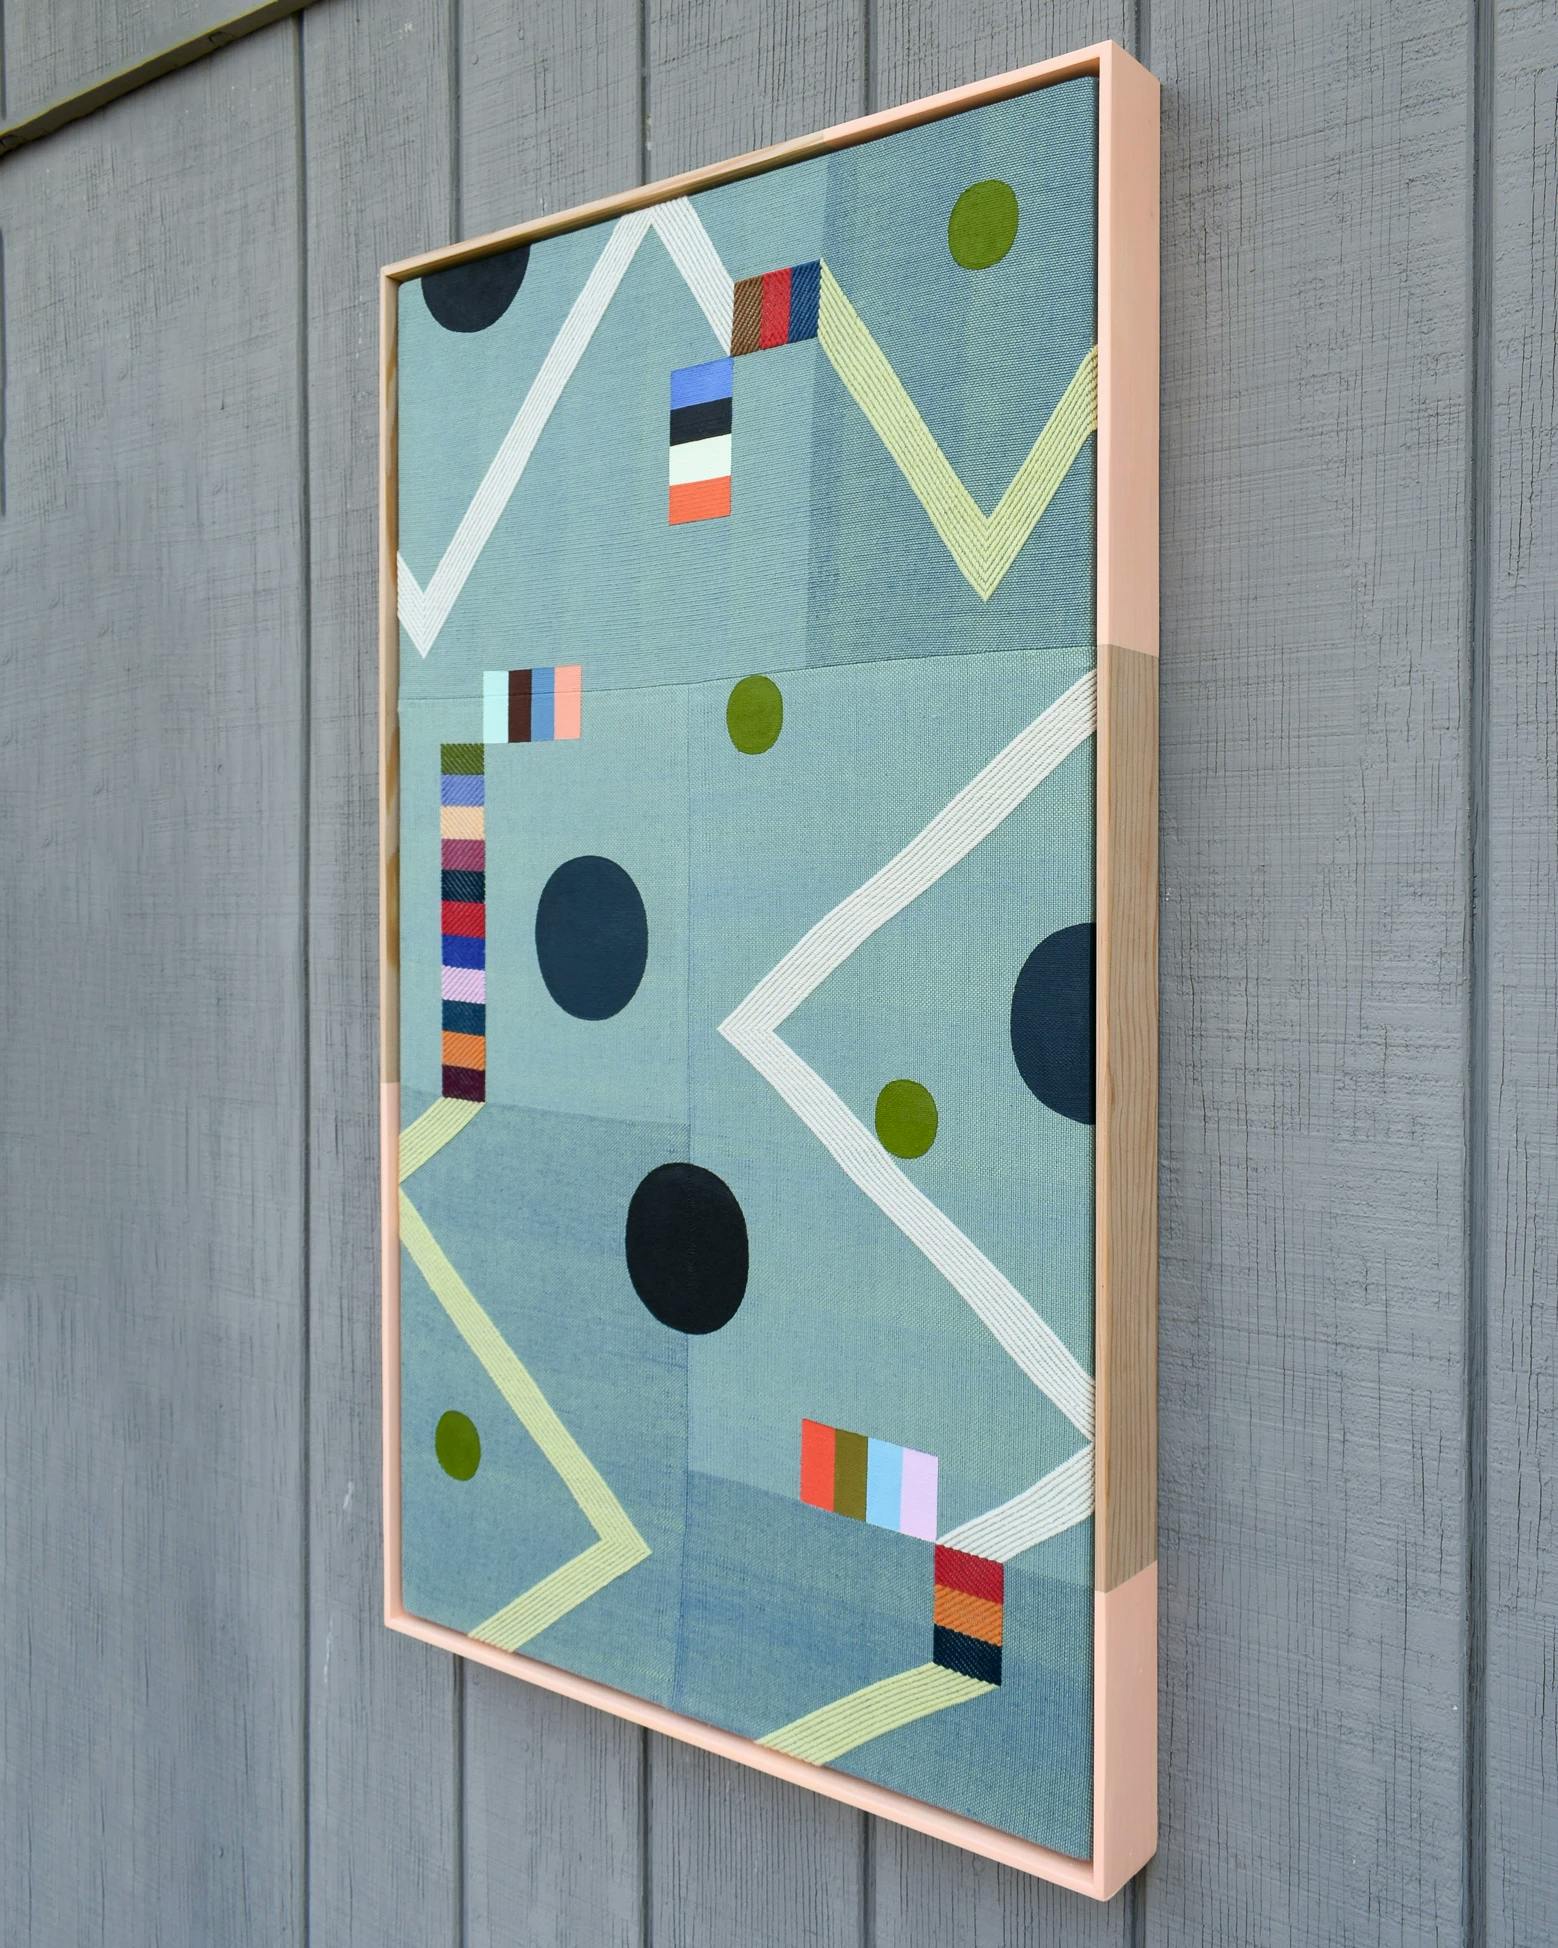 Abstract teal artwork with handwoven diagonals and circular shapes by artist Sarah Sullivan Sherrod.